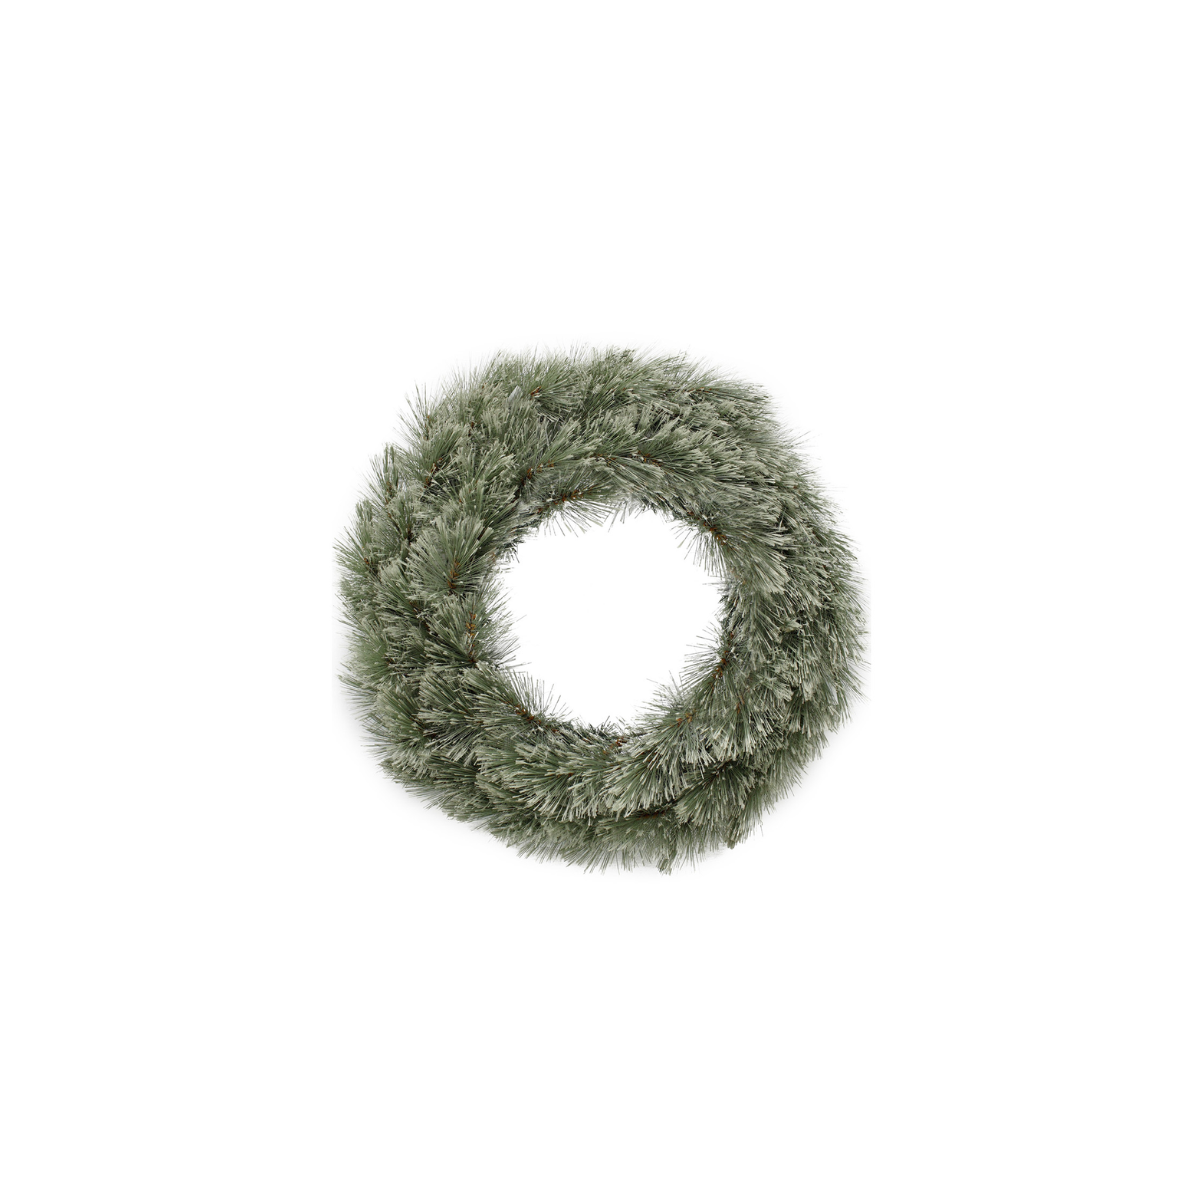 24 inch Mountain Cashmere Christmas Wreath